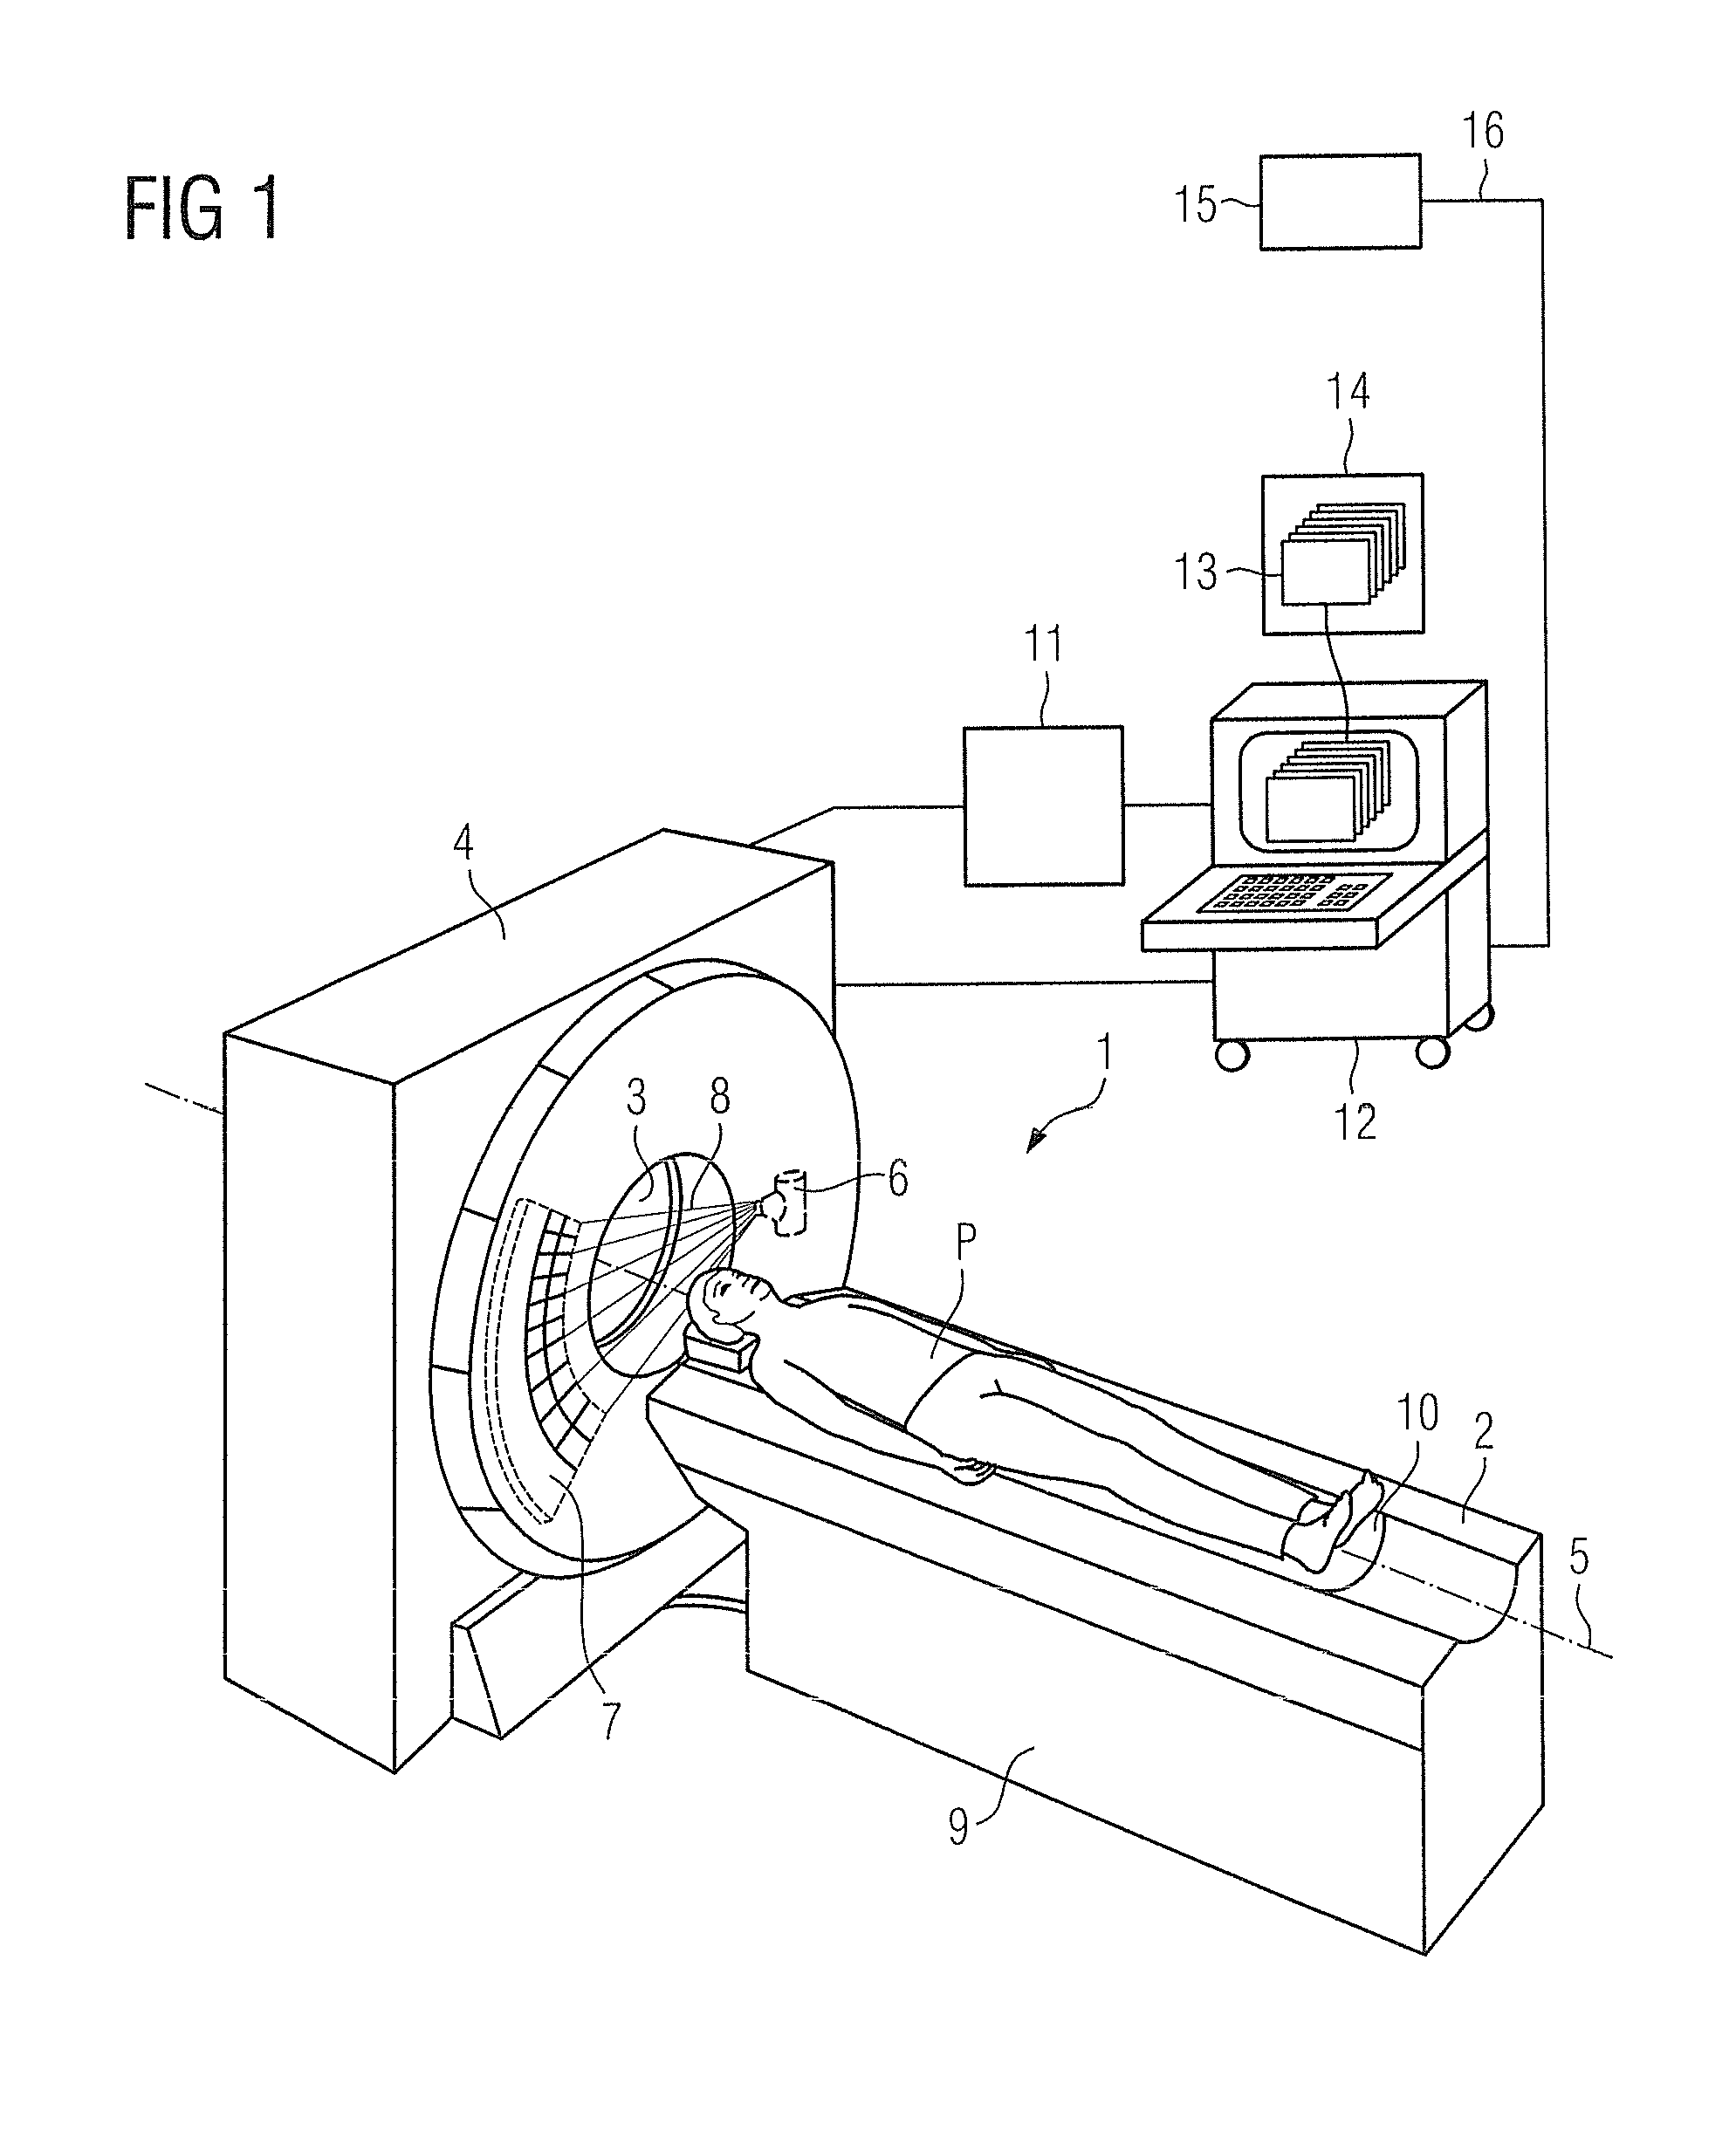 Method and device to assist in dose reduction of X-ray radiation applied to a patient